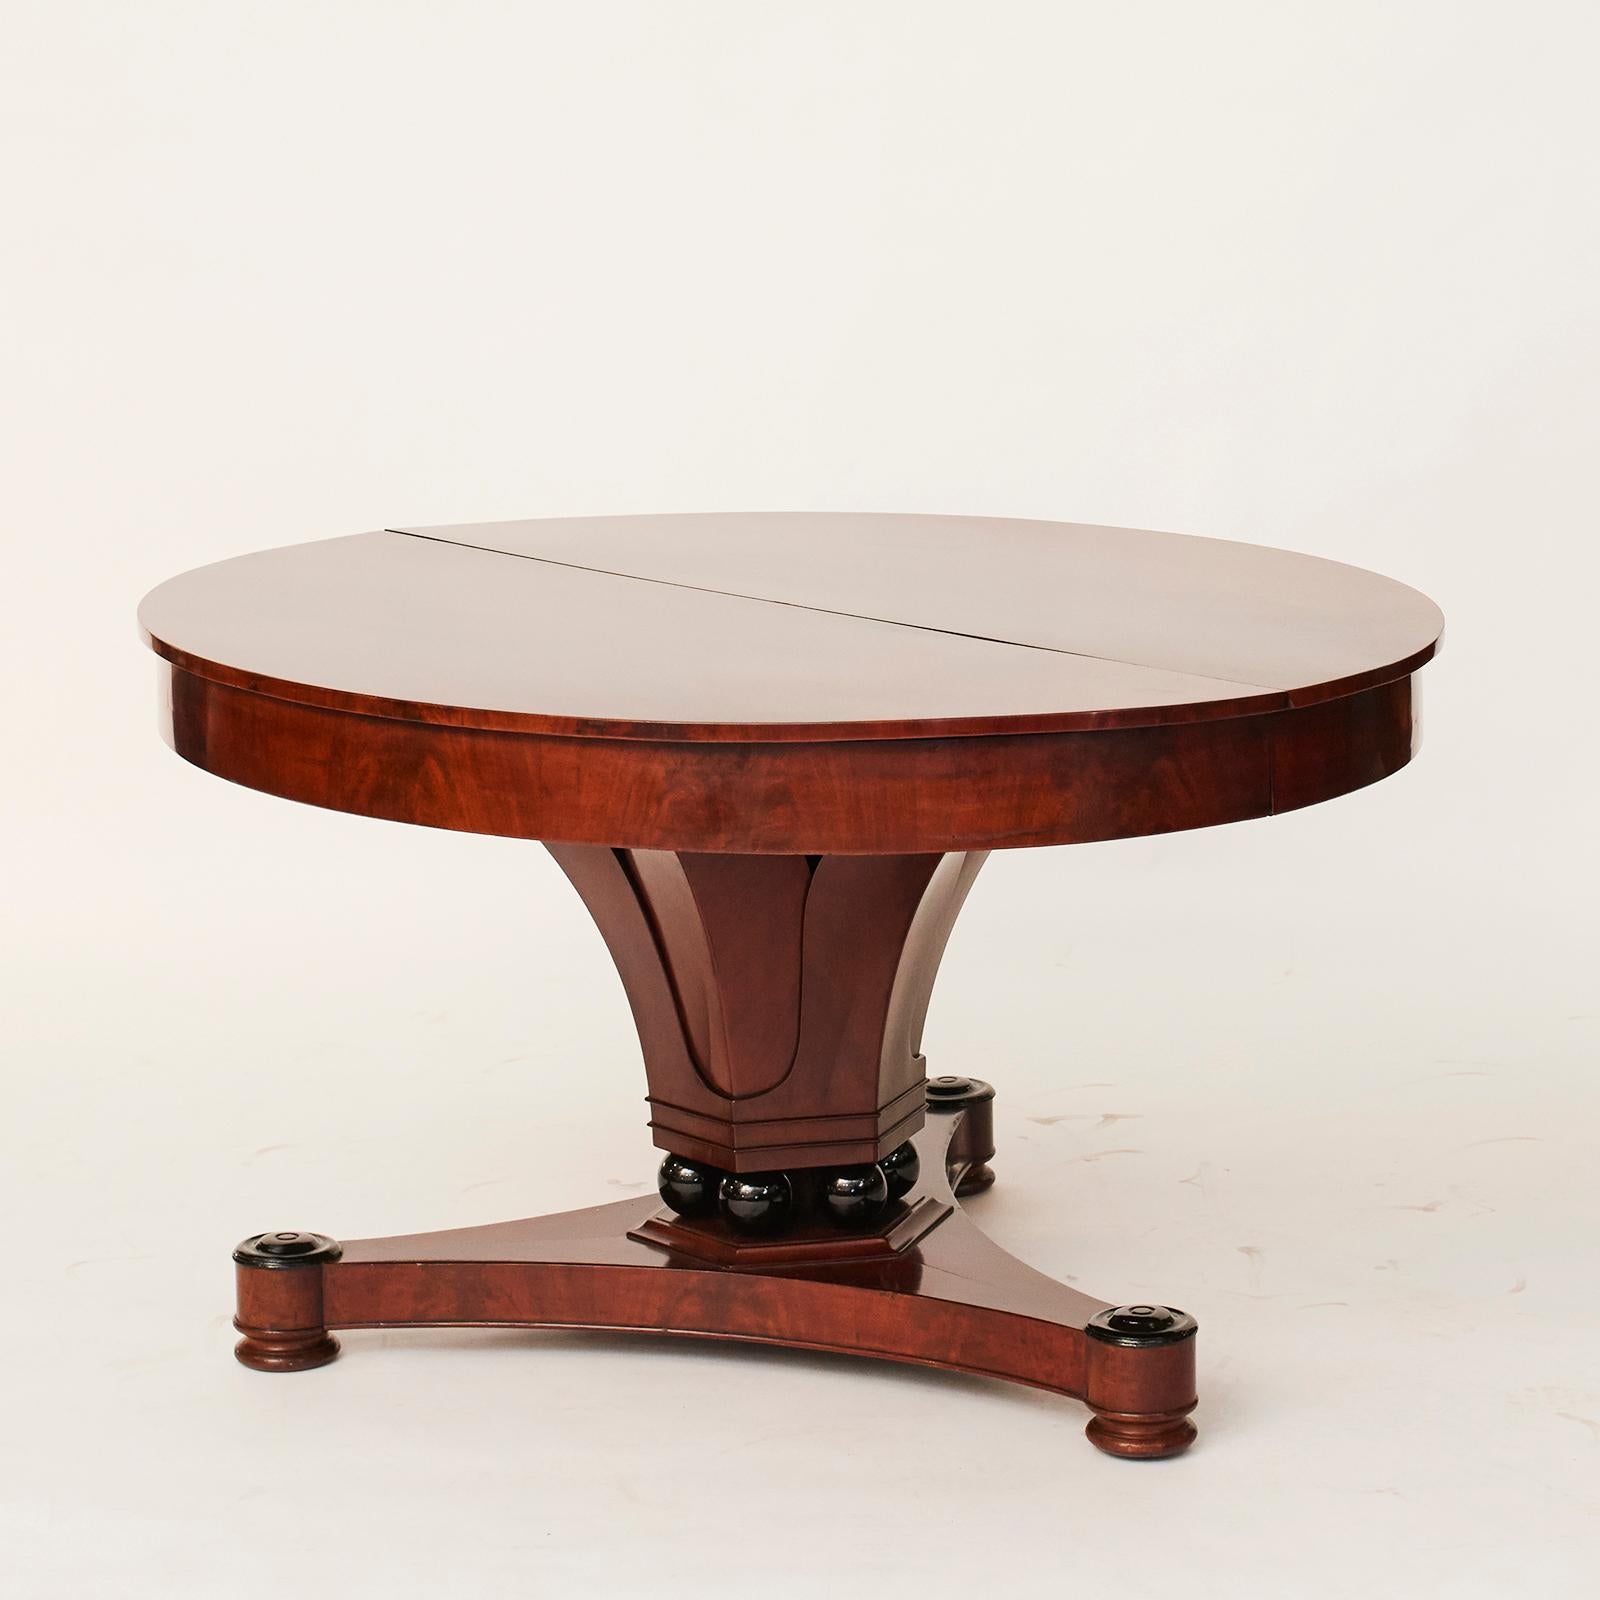 Dining table with pull-out (4 add-on plates with rail, 60 cm). Biedermeier circa 1820-30, Presumably Austria. A beautiful table and design which illustrates how Art Deco has gained inspiration 100 years later. Total length with plates: 385 cm.